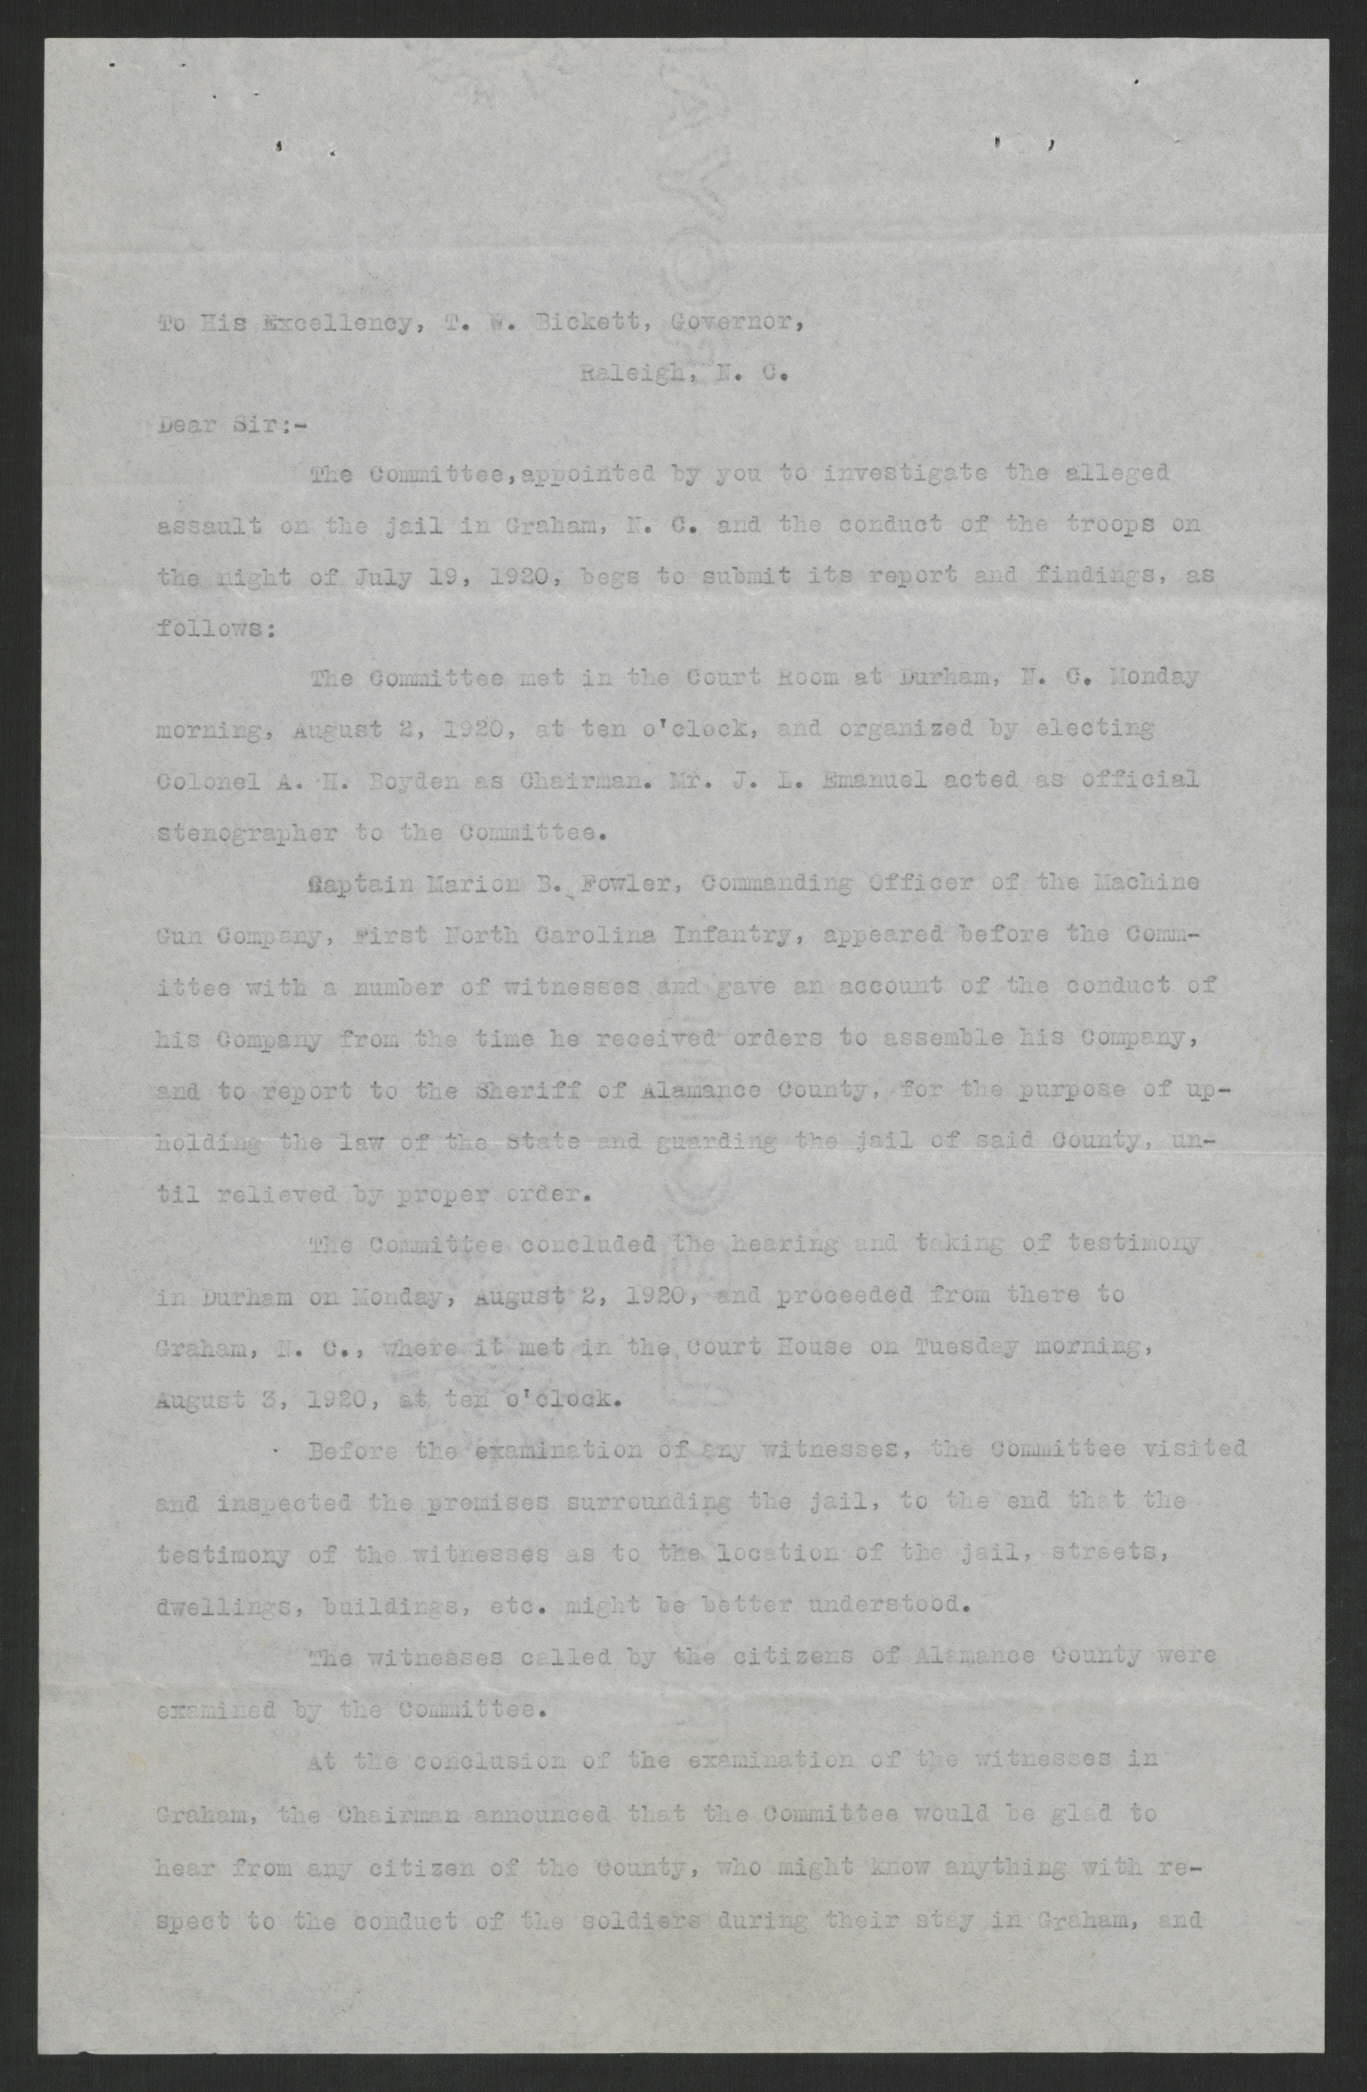 Report of the Investigative Committee on its Findings of the Attempted Lynching at Graham, August 16, 1920, page 1